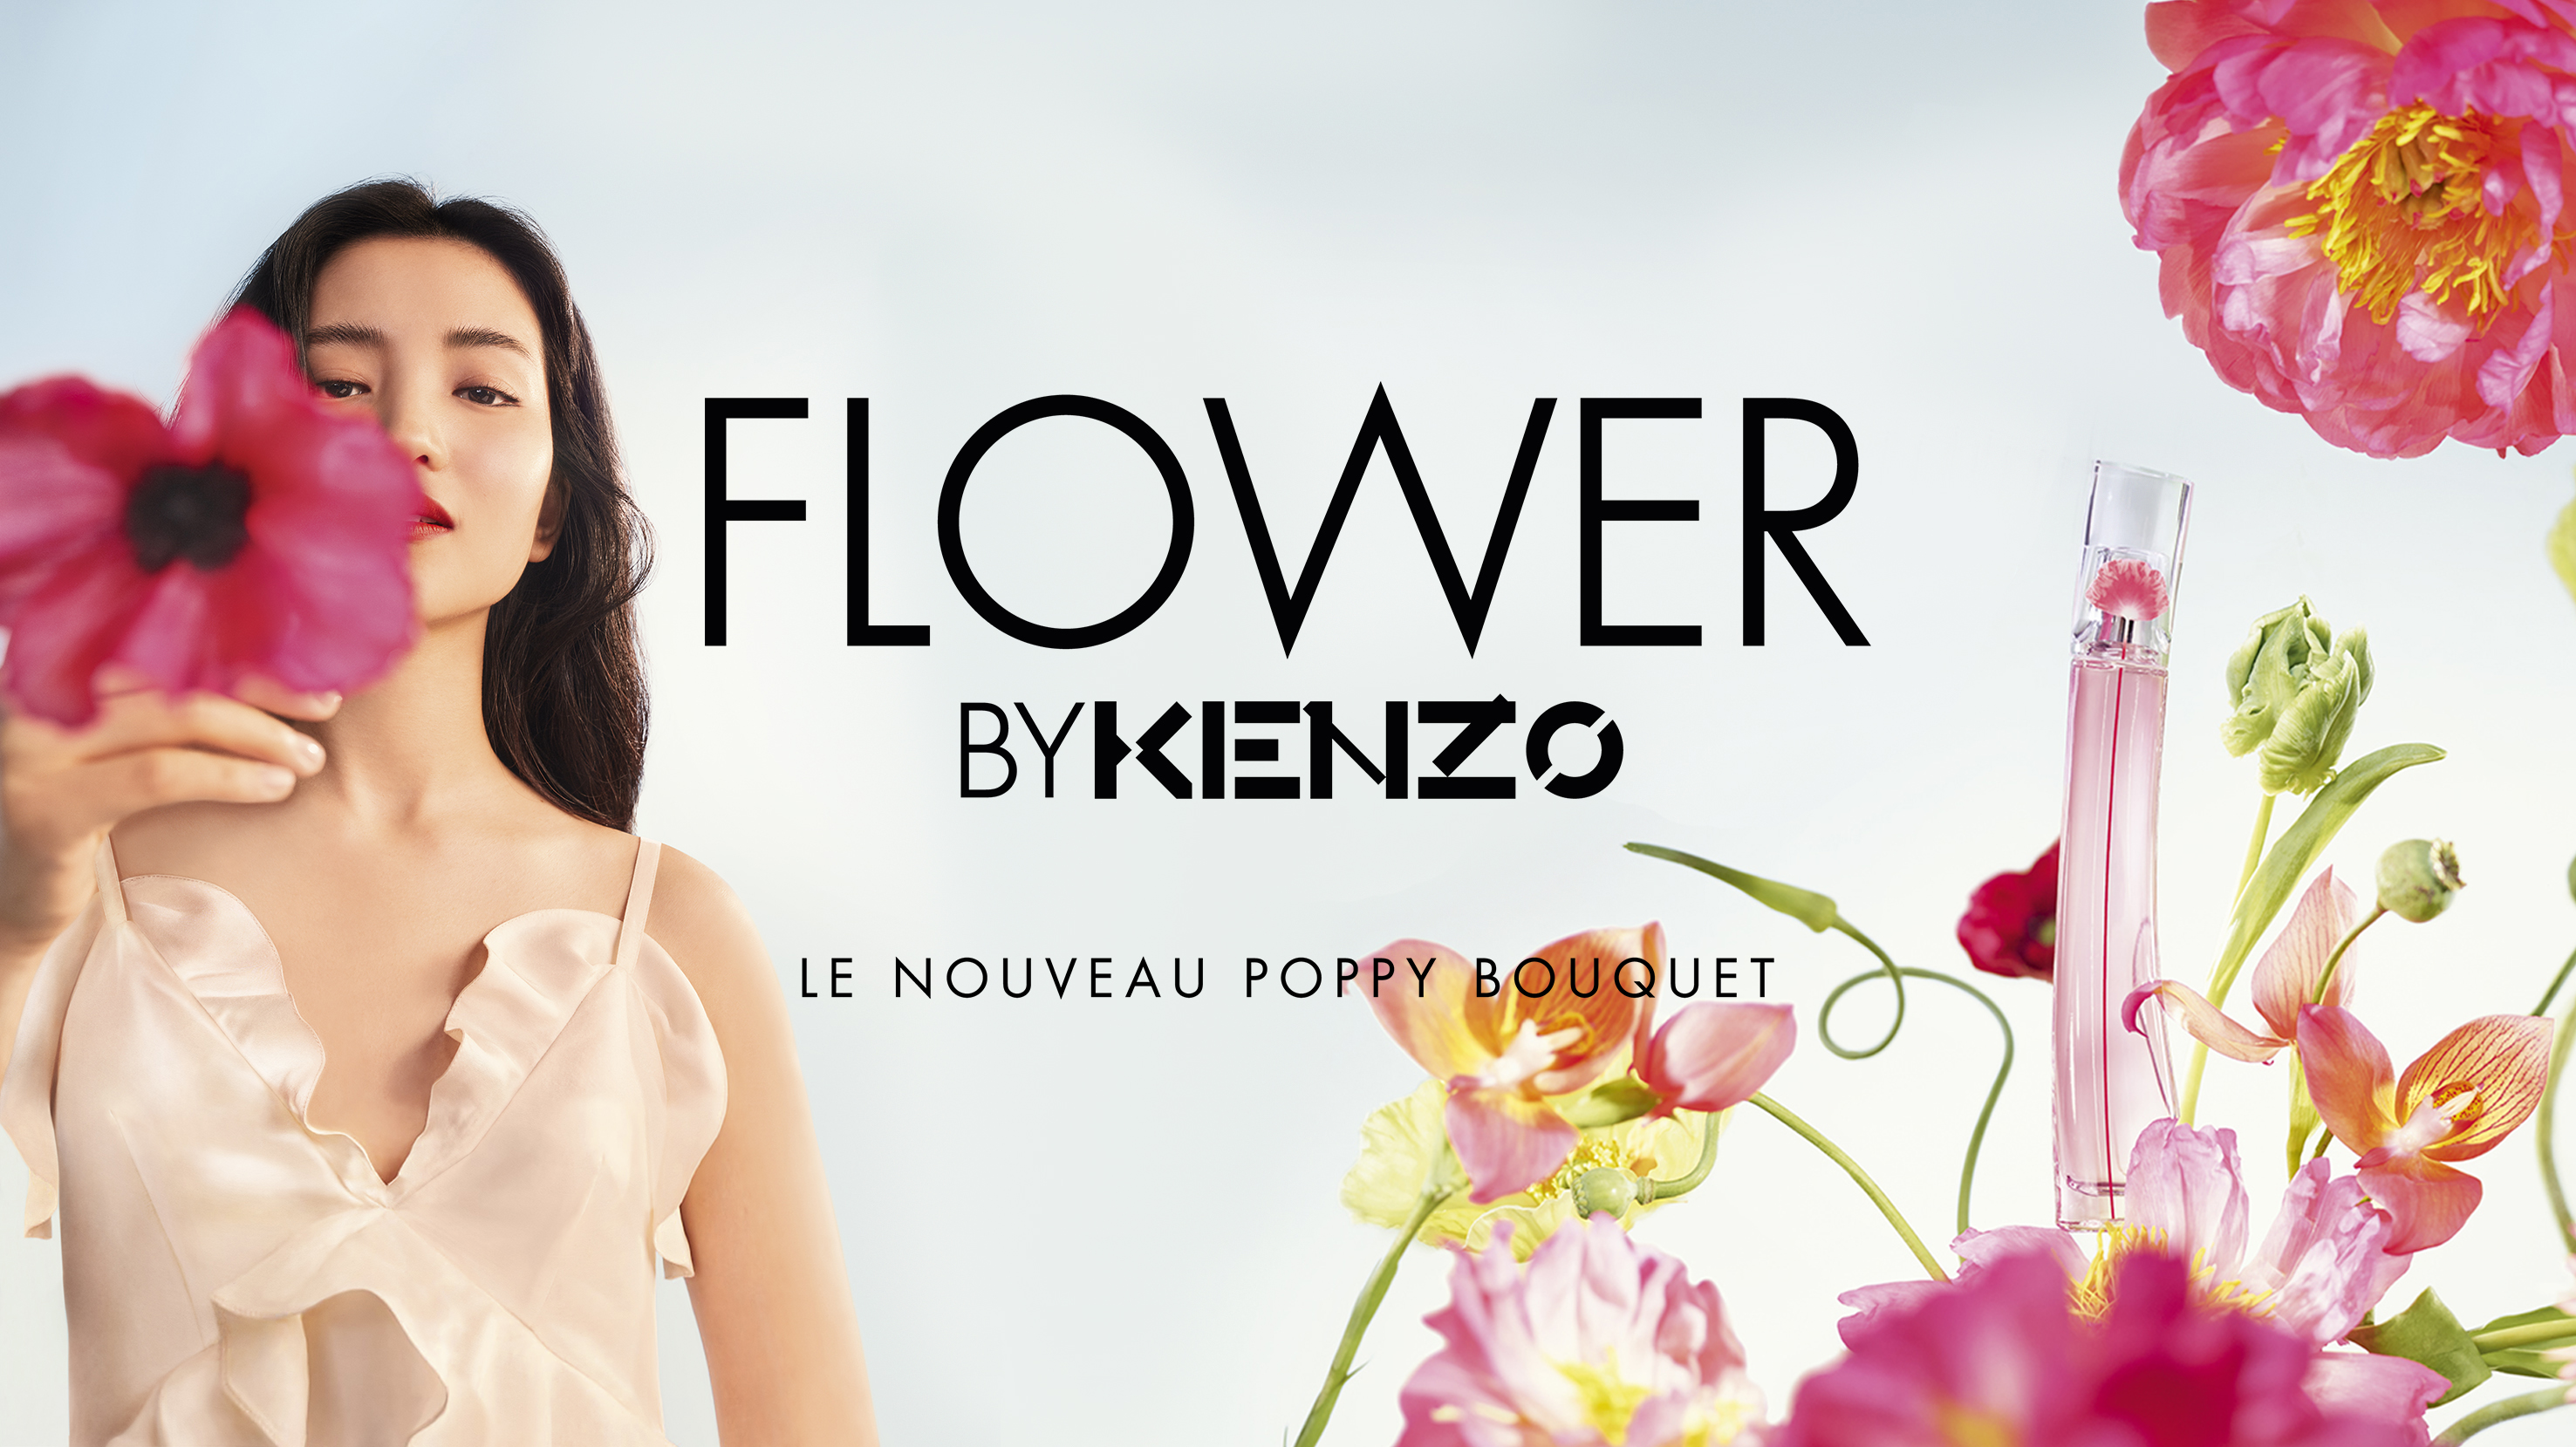 Les parfums FLOWER BY KENZO - Kenzo Parfums